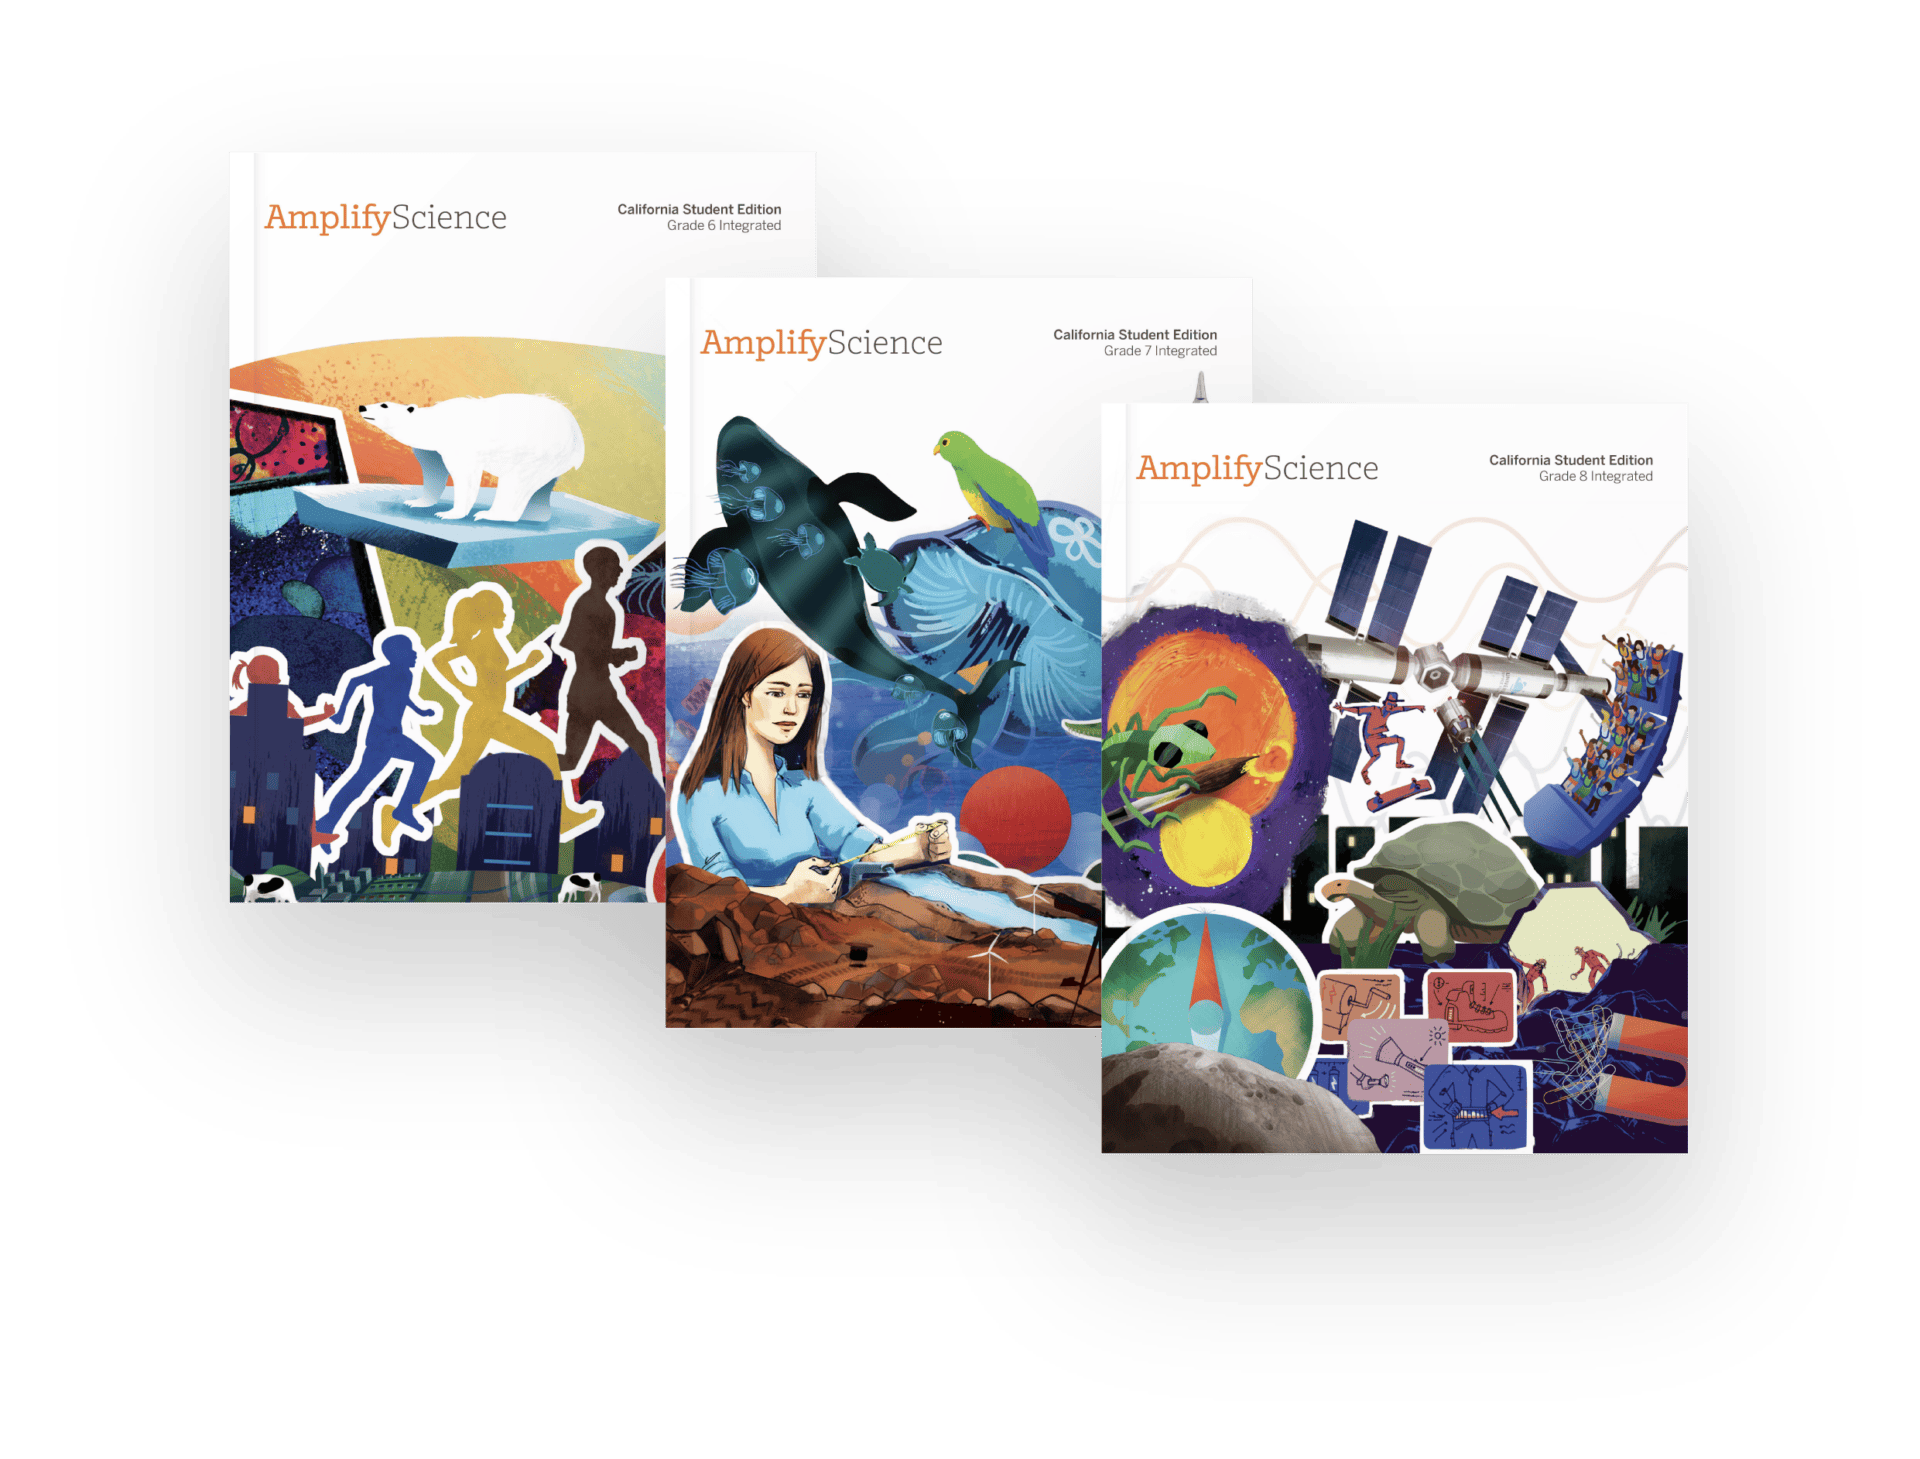 Three amplify science textbook covers featuring vibrant, abstract illustrations with themes of technology, nature, and human interaction.